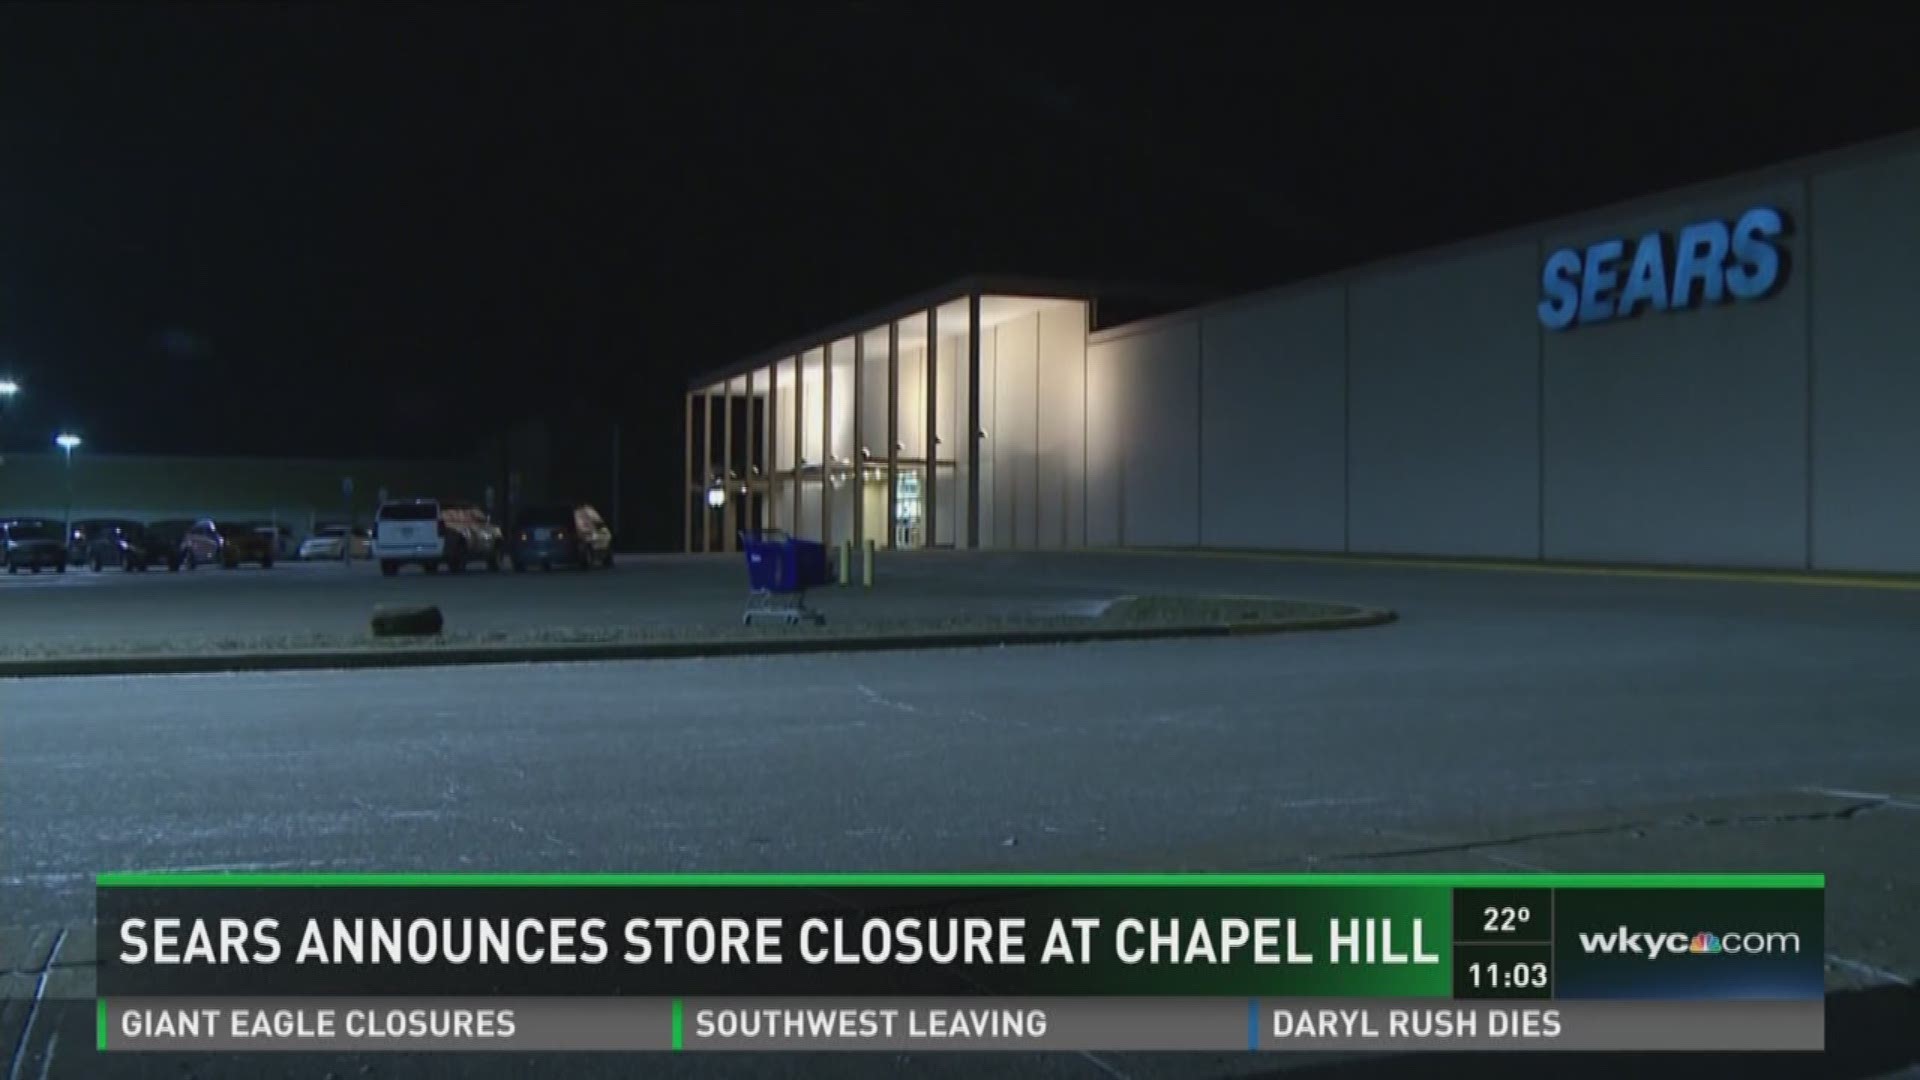 Sears announces store closure at Chapel Hill